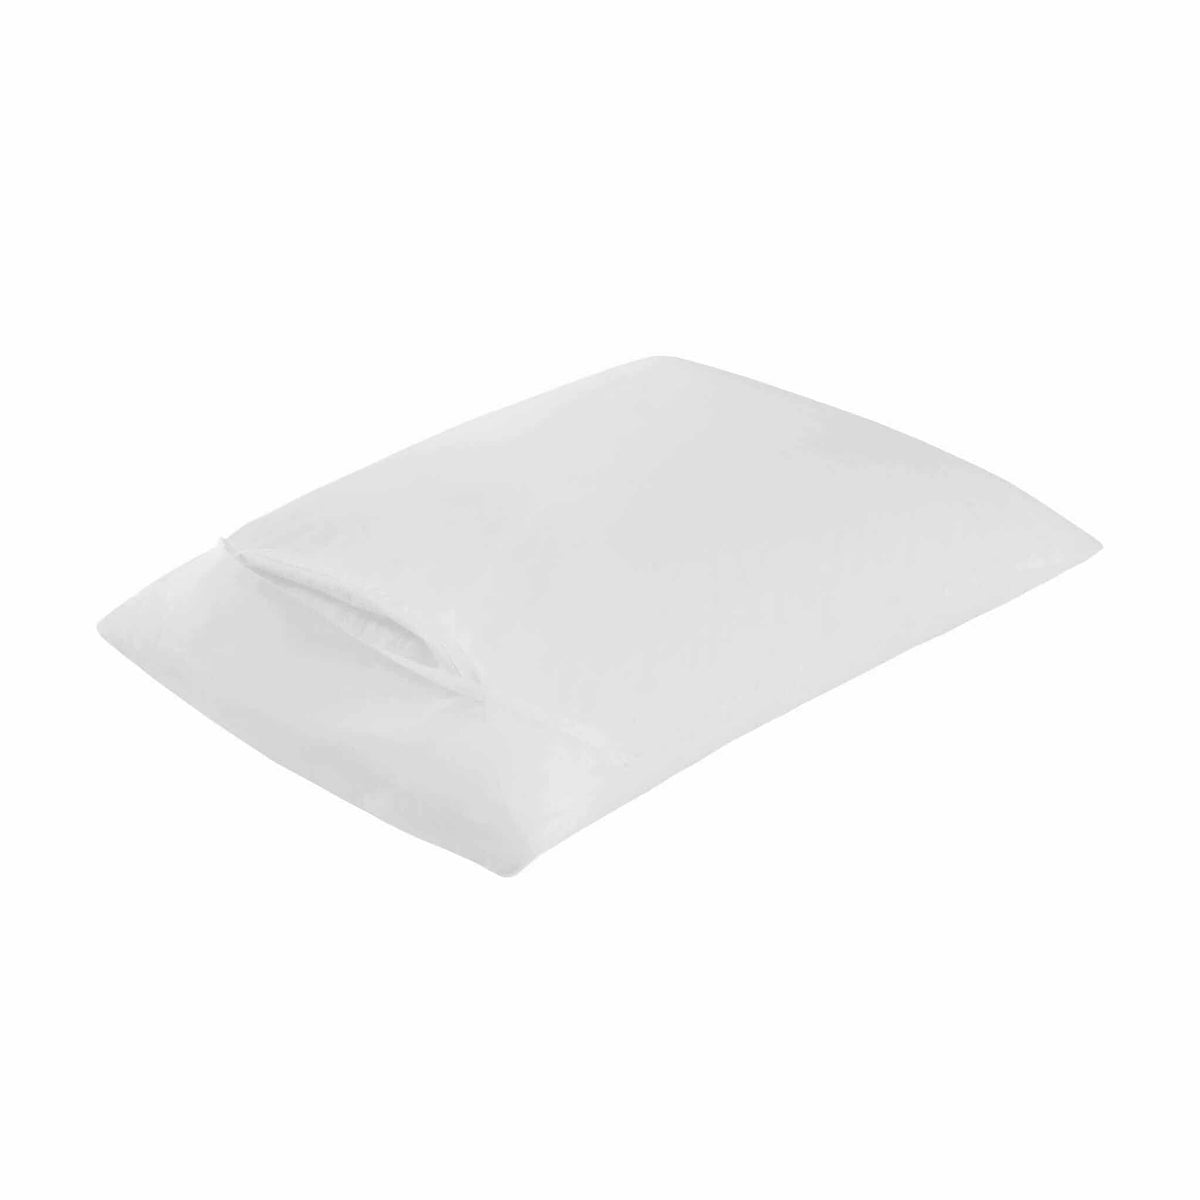 This pillow cover features a French fold and an elegant envelope enclosure, provides total protection for the pillow insert